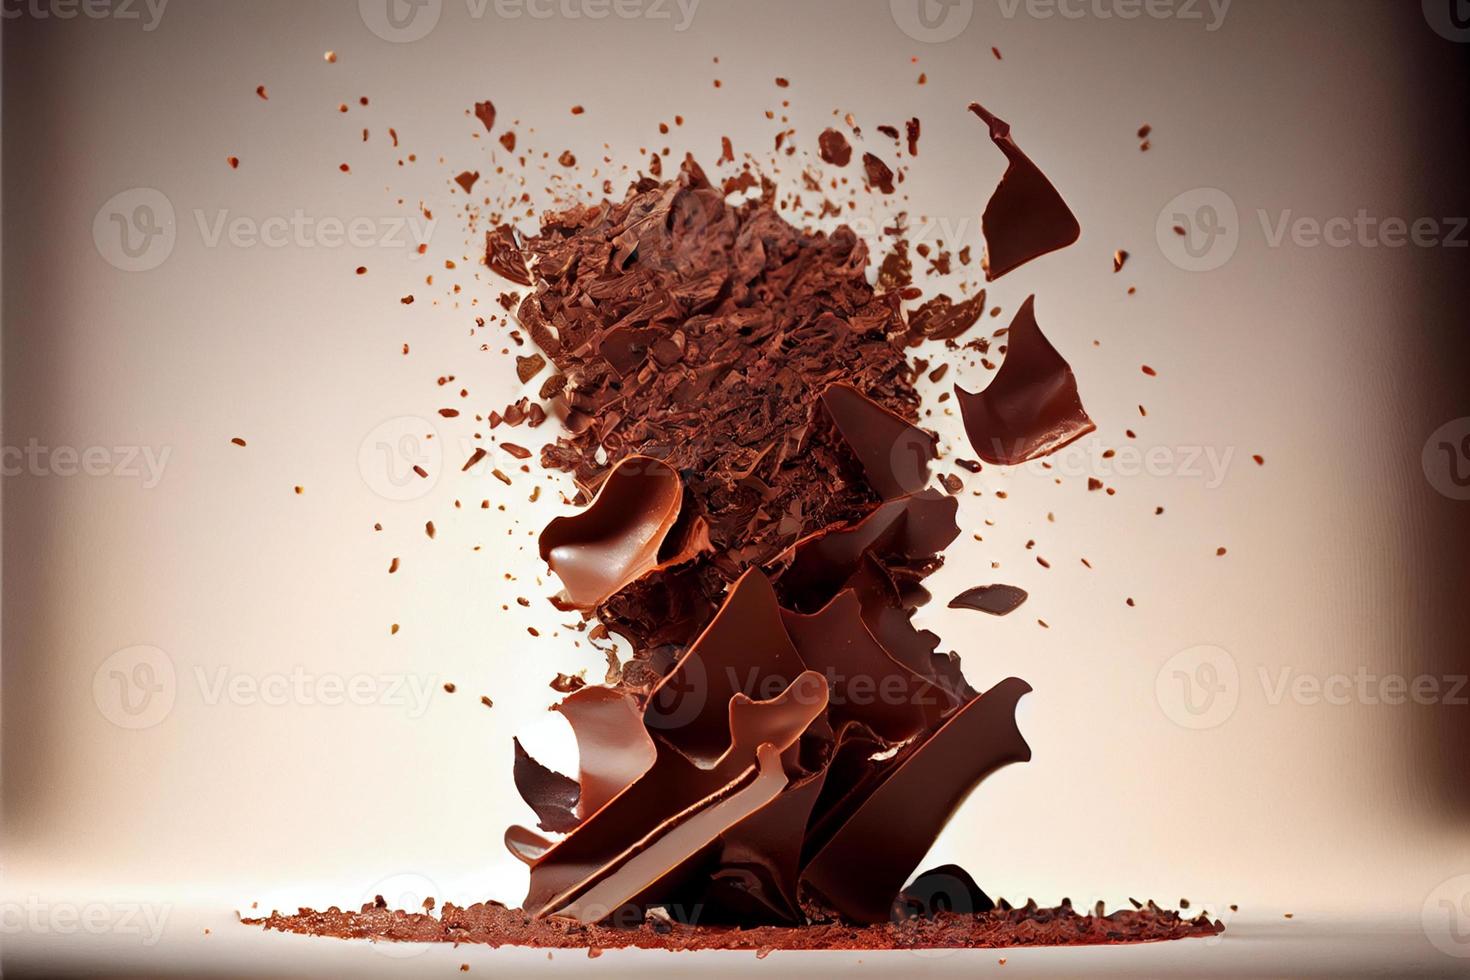 Flying pieces of Crushed chocolate pieces with liquide chocolate Valentine's Day 3D and illustrations photo